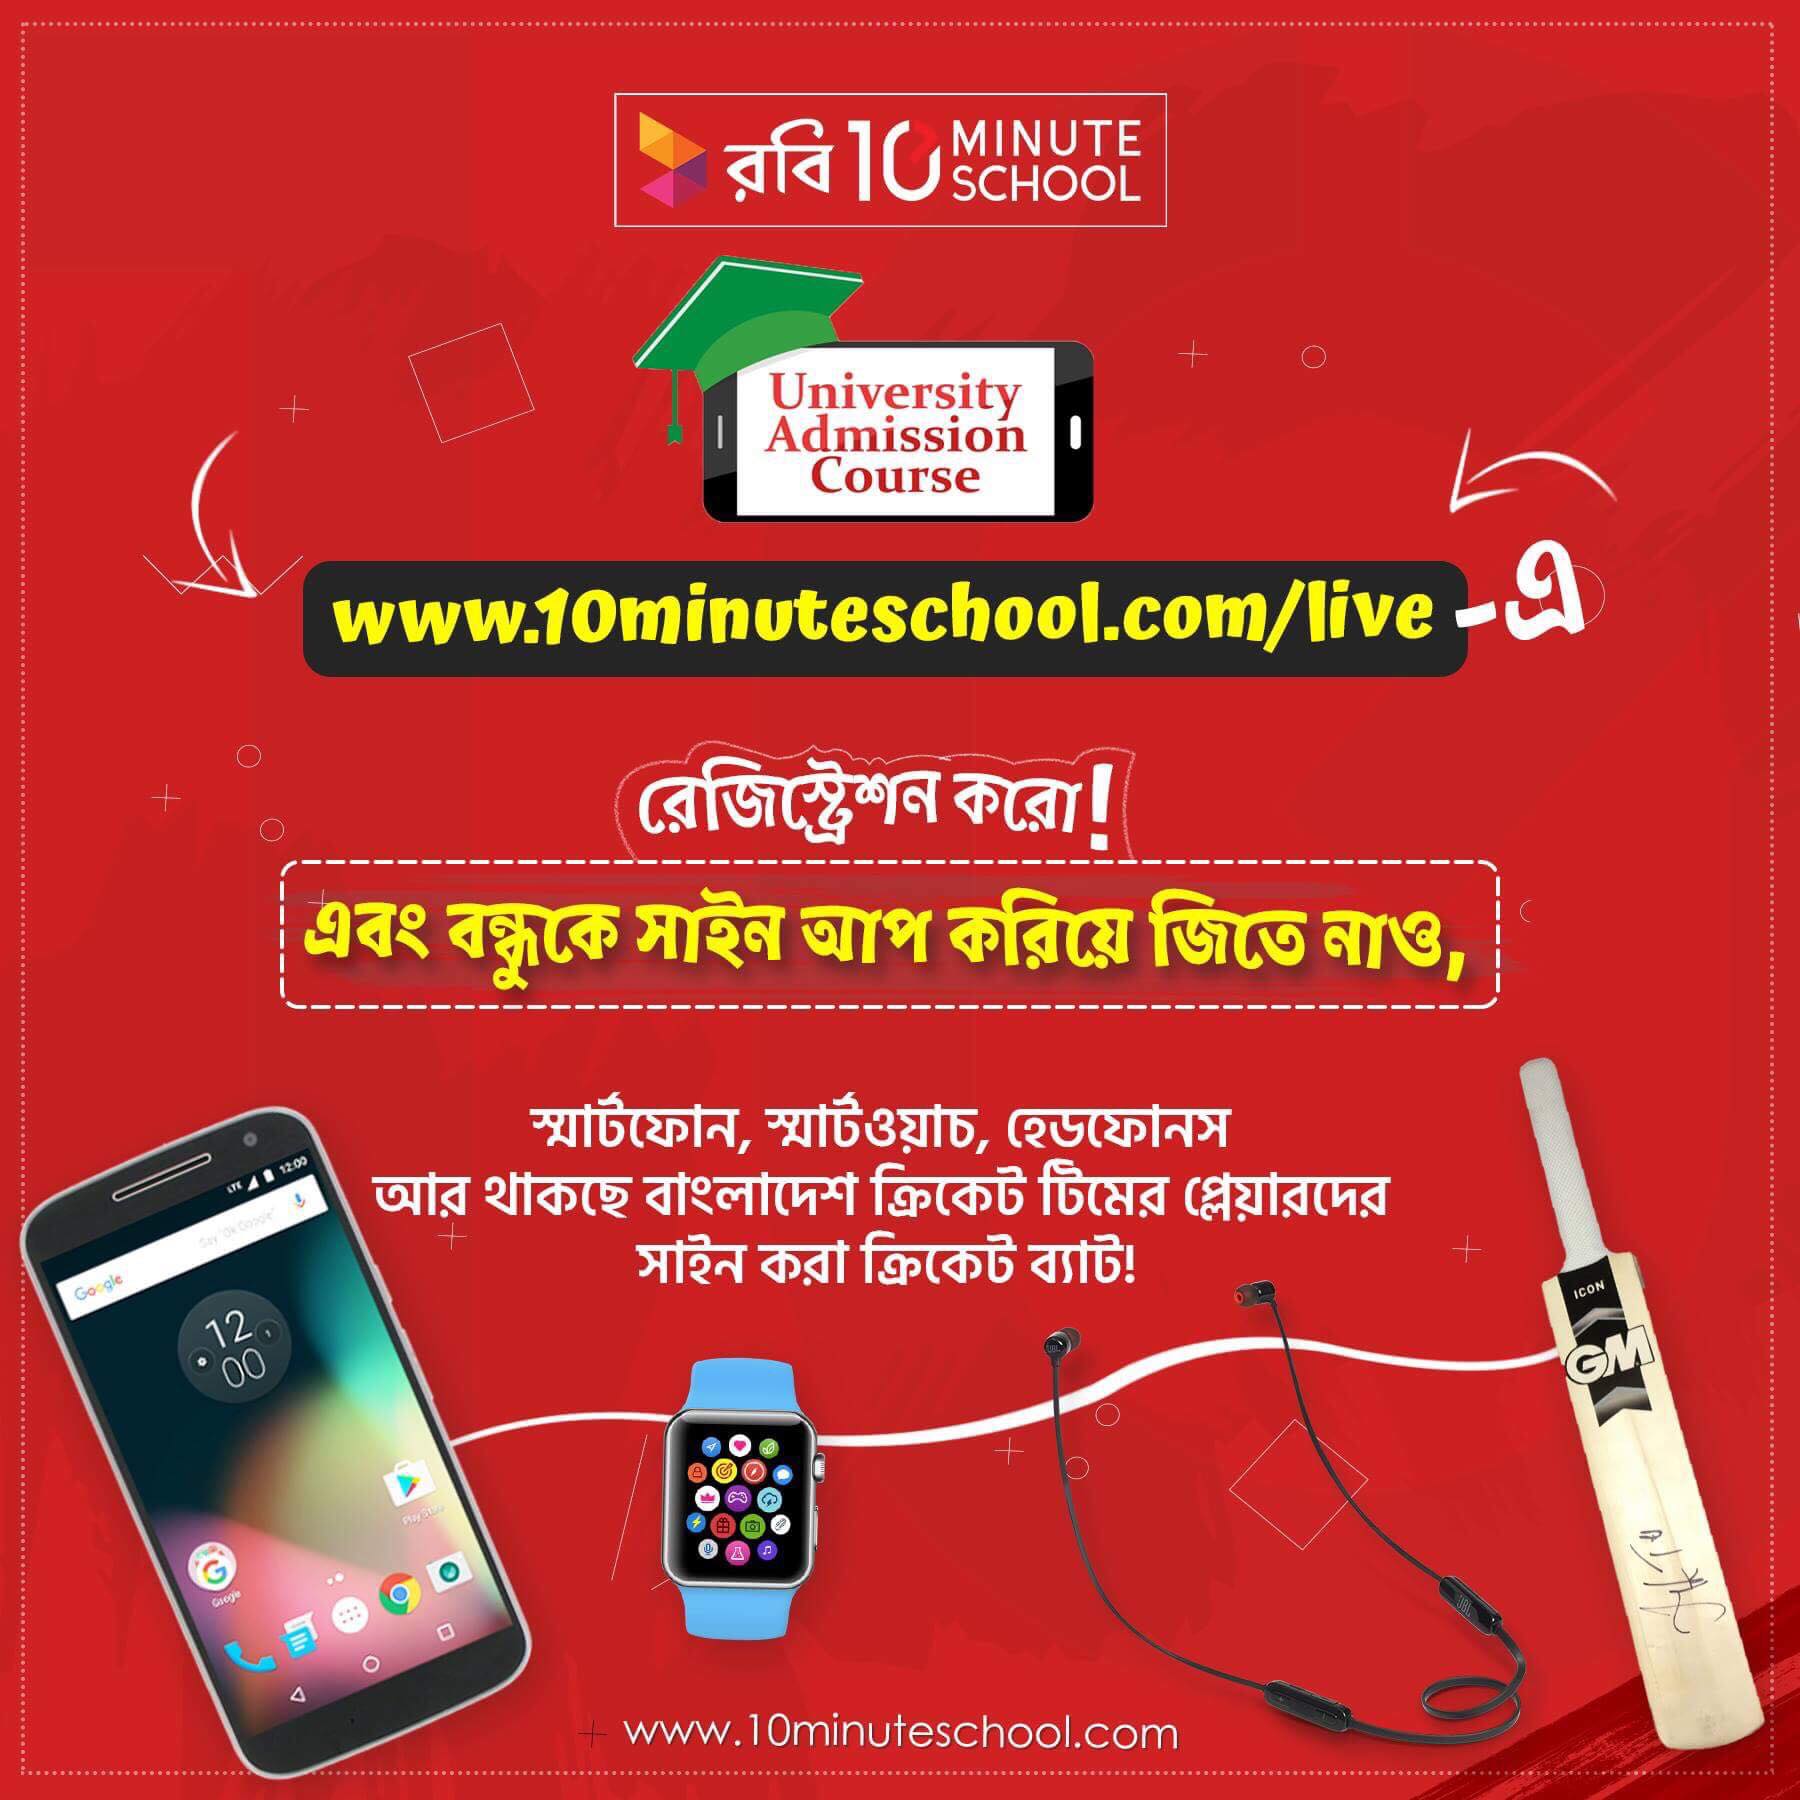 Robi introducing new Ten minute school for Dhaka University entry 